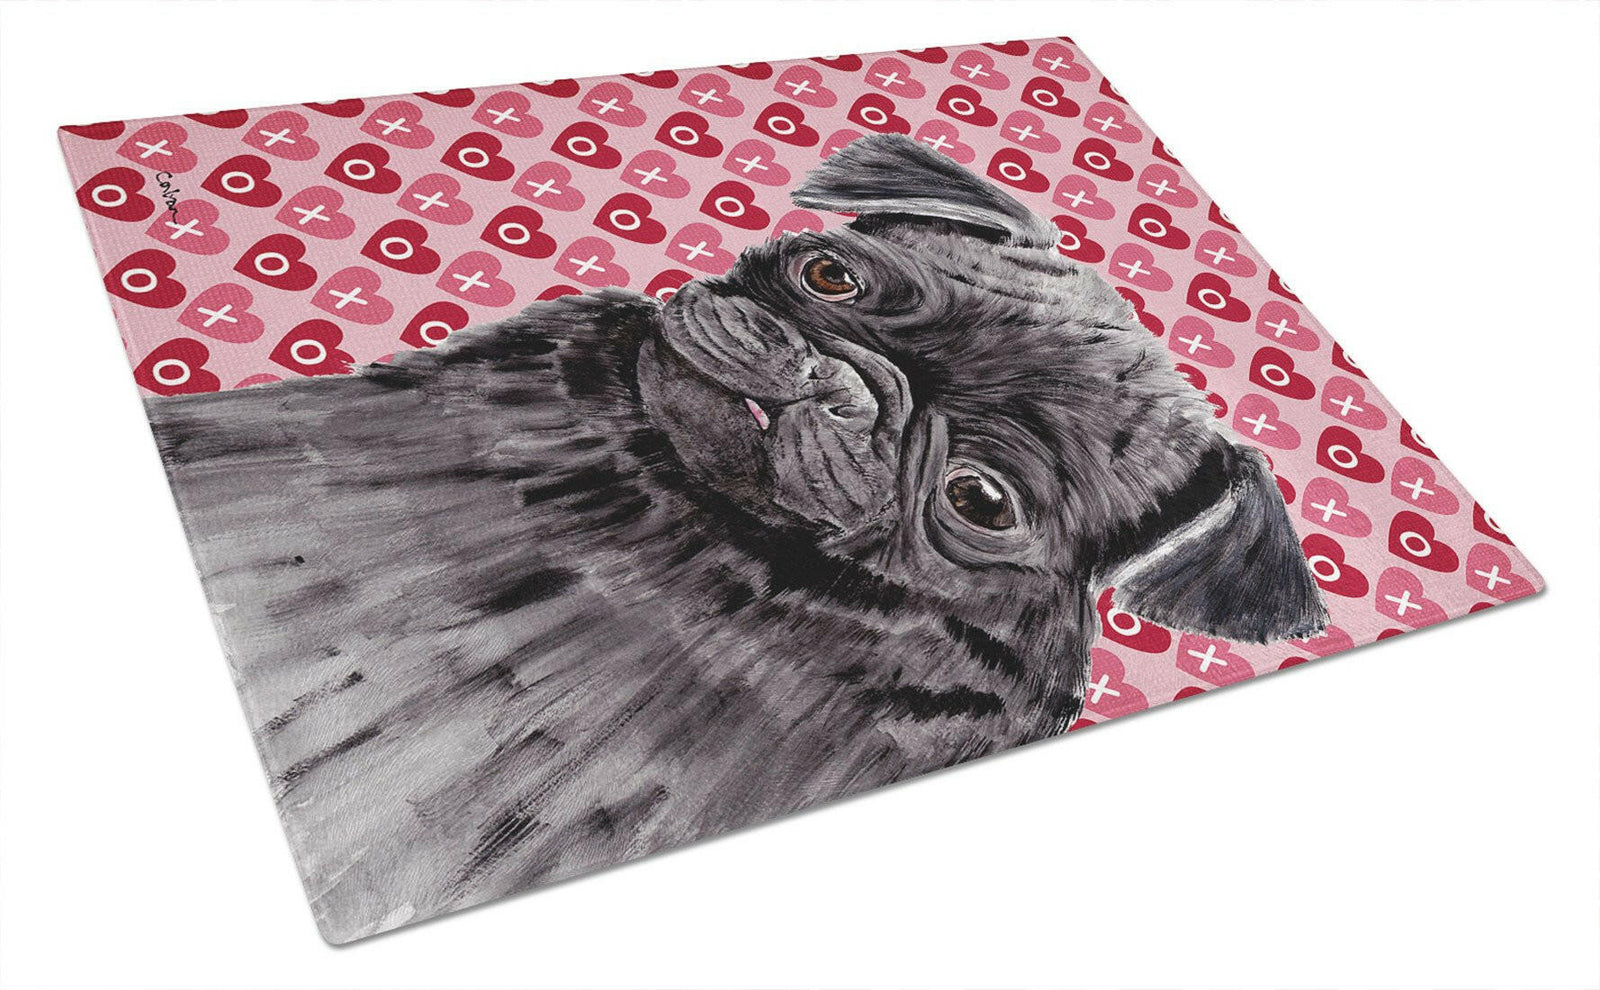 Pug Black Hearts Love and Valentine's Day Portrait Glass Cutting Board Large by Caroline's Treasures